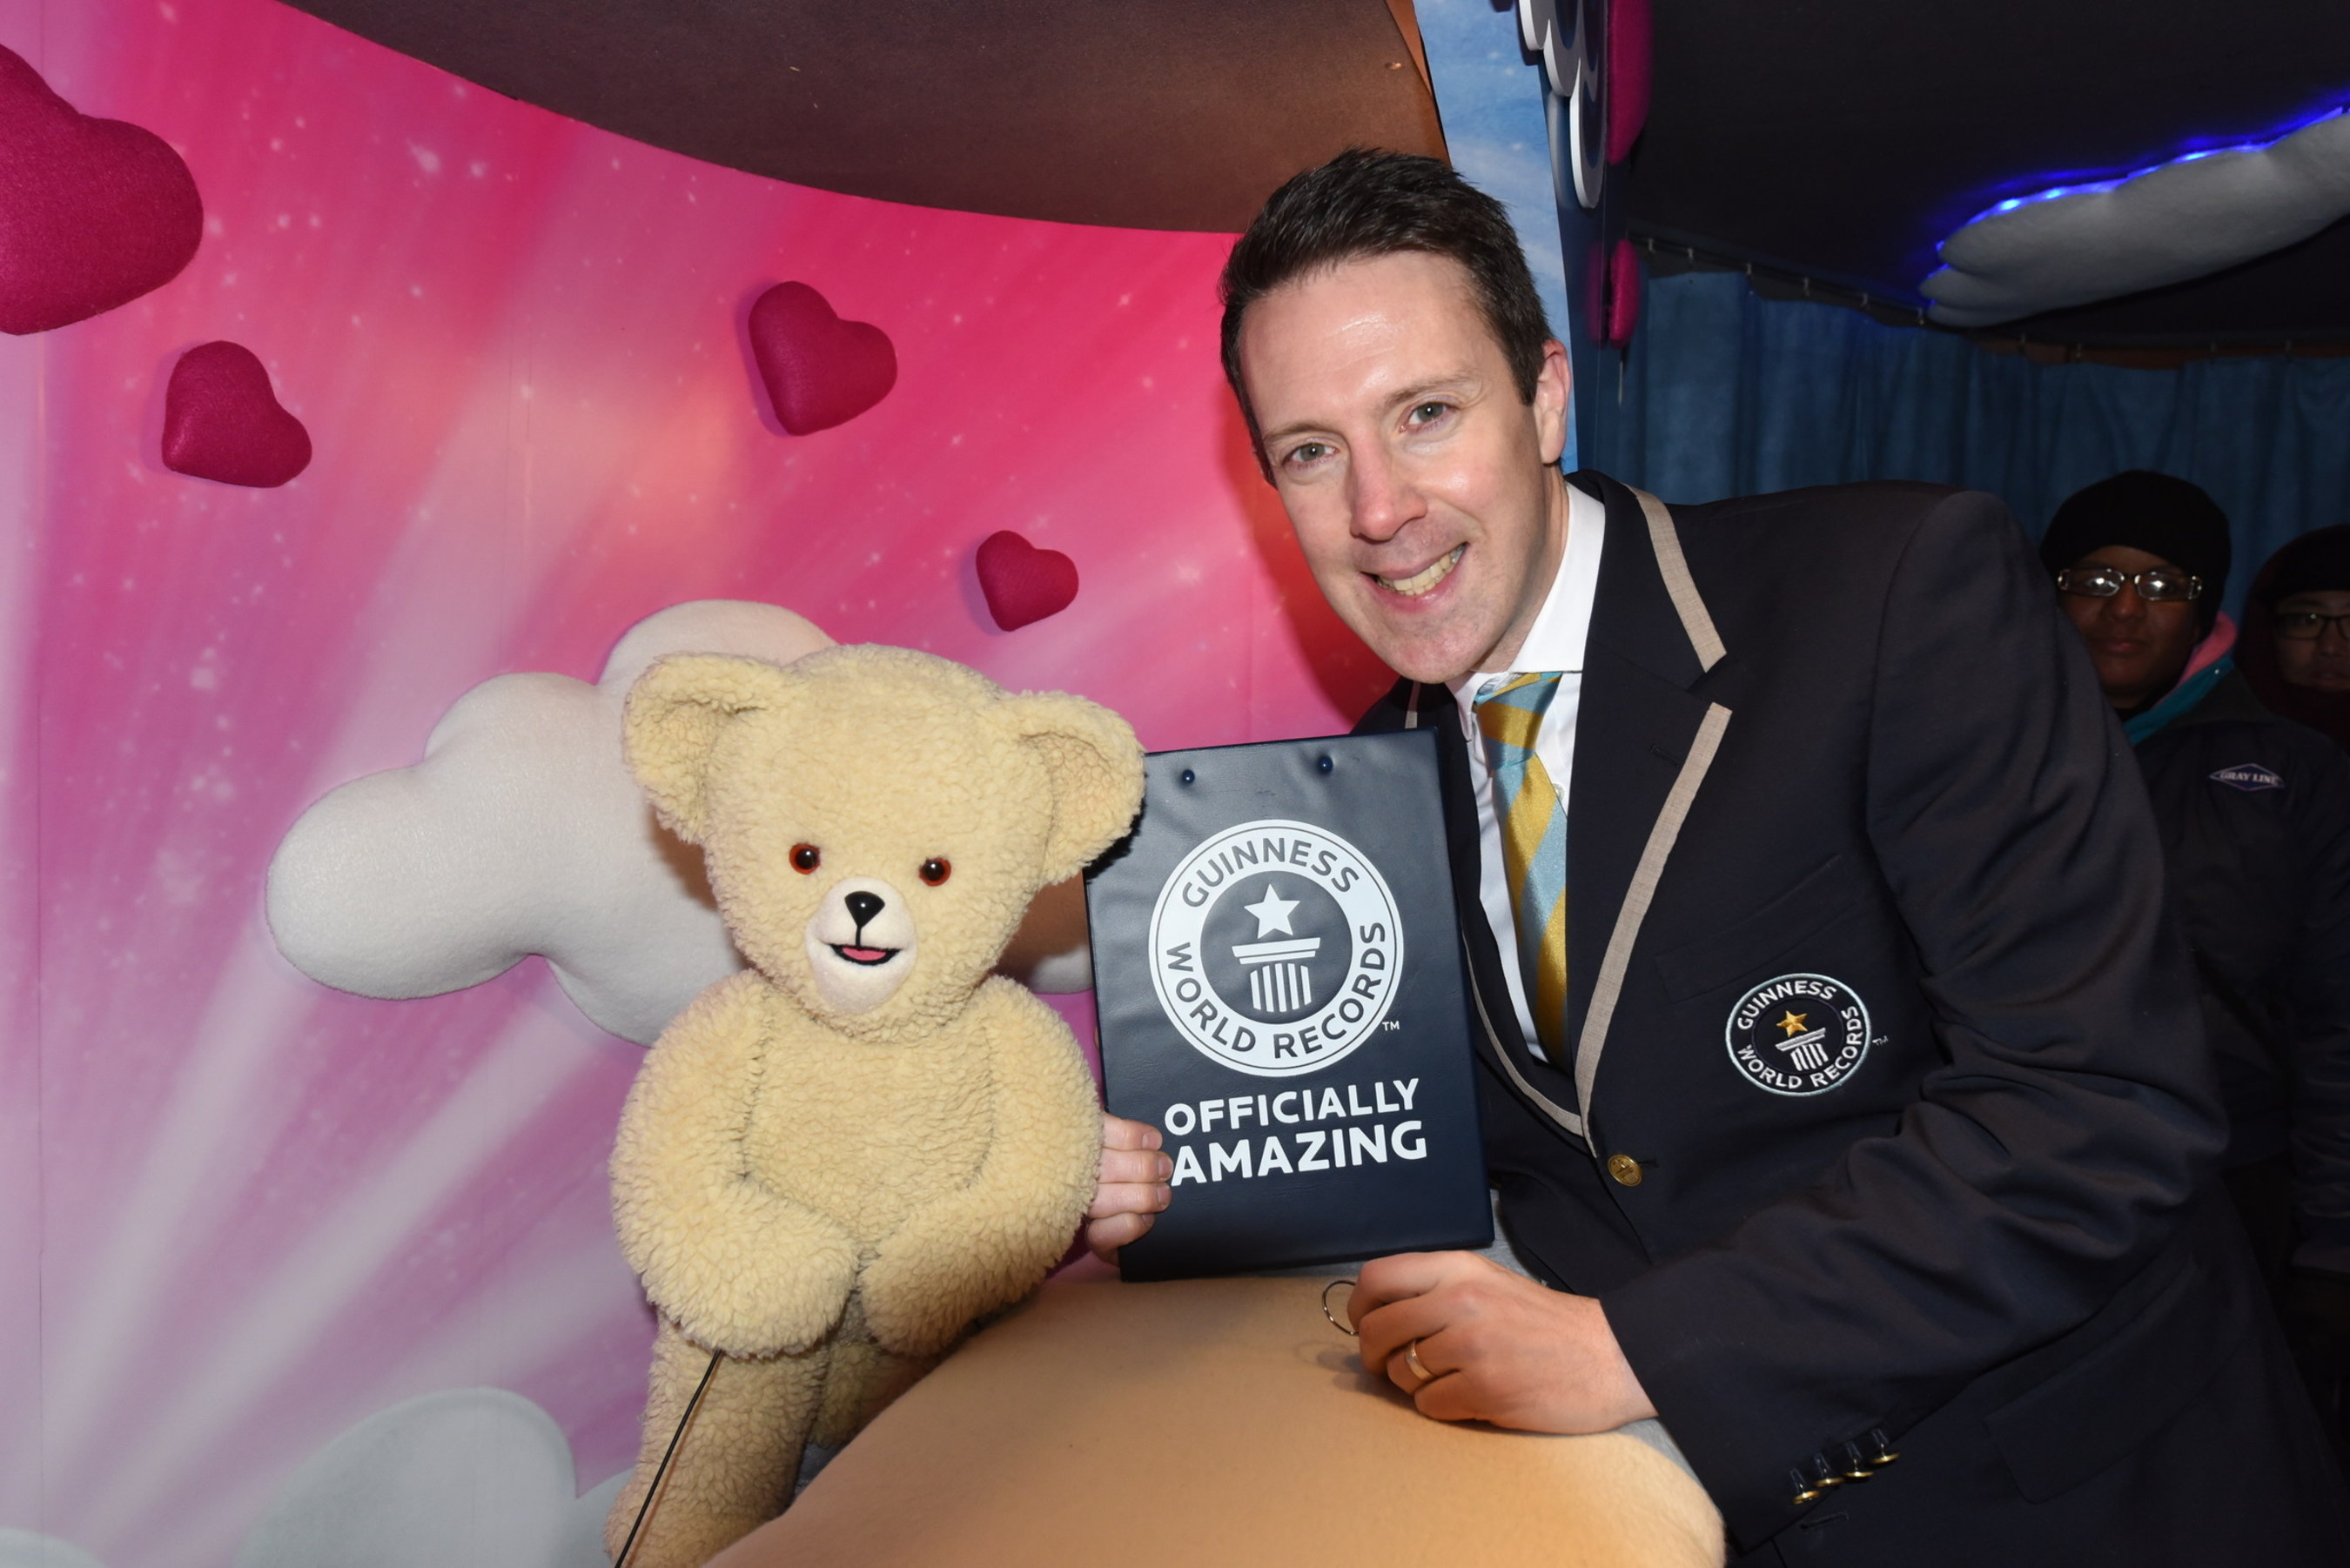 Snuggle Bear attempts to set the GUINNESS WORLD RECORD for the most hugs in 8 hours with 5,000 hugs.